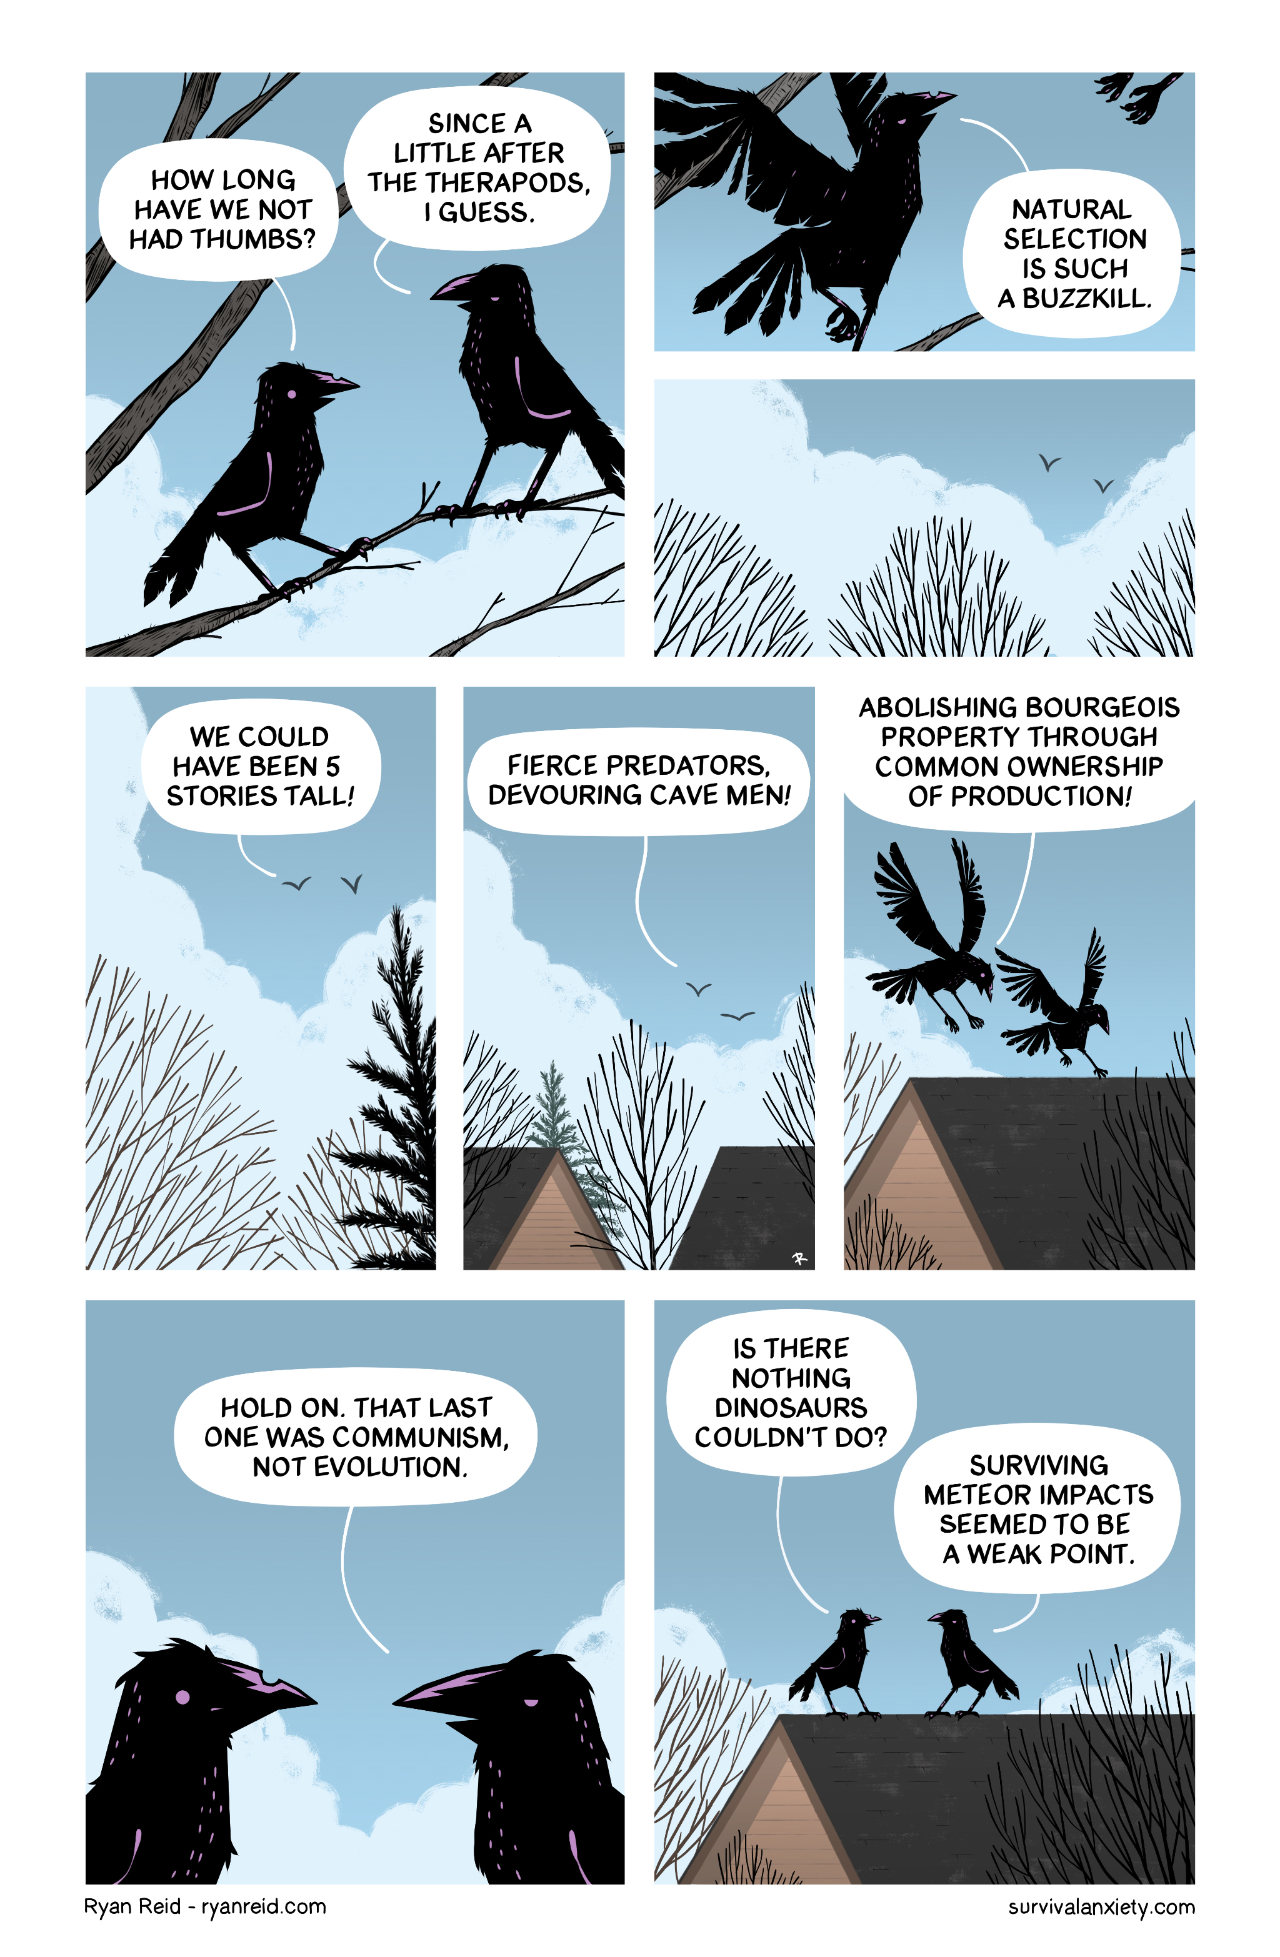 In this comic, the crows discuss how natural selection has effected their lives.